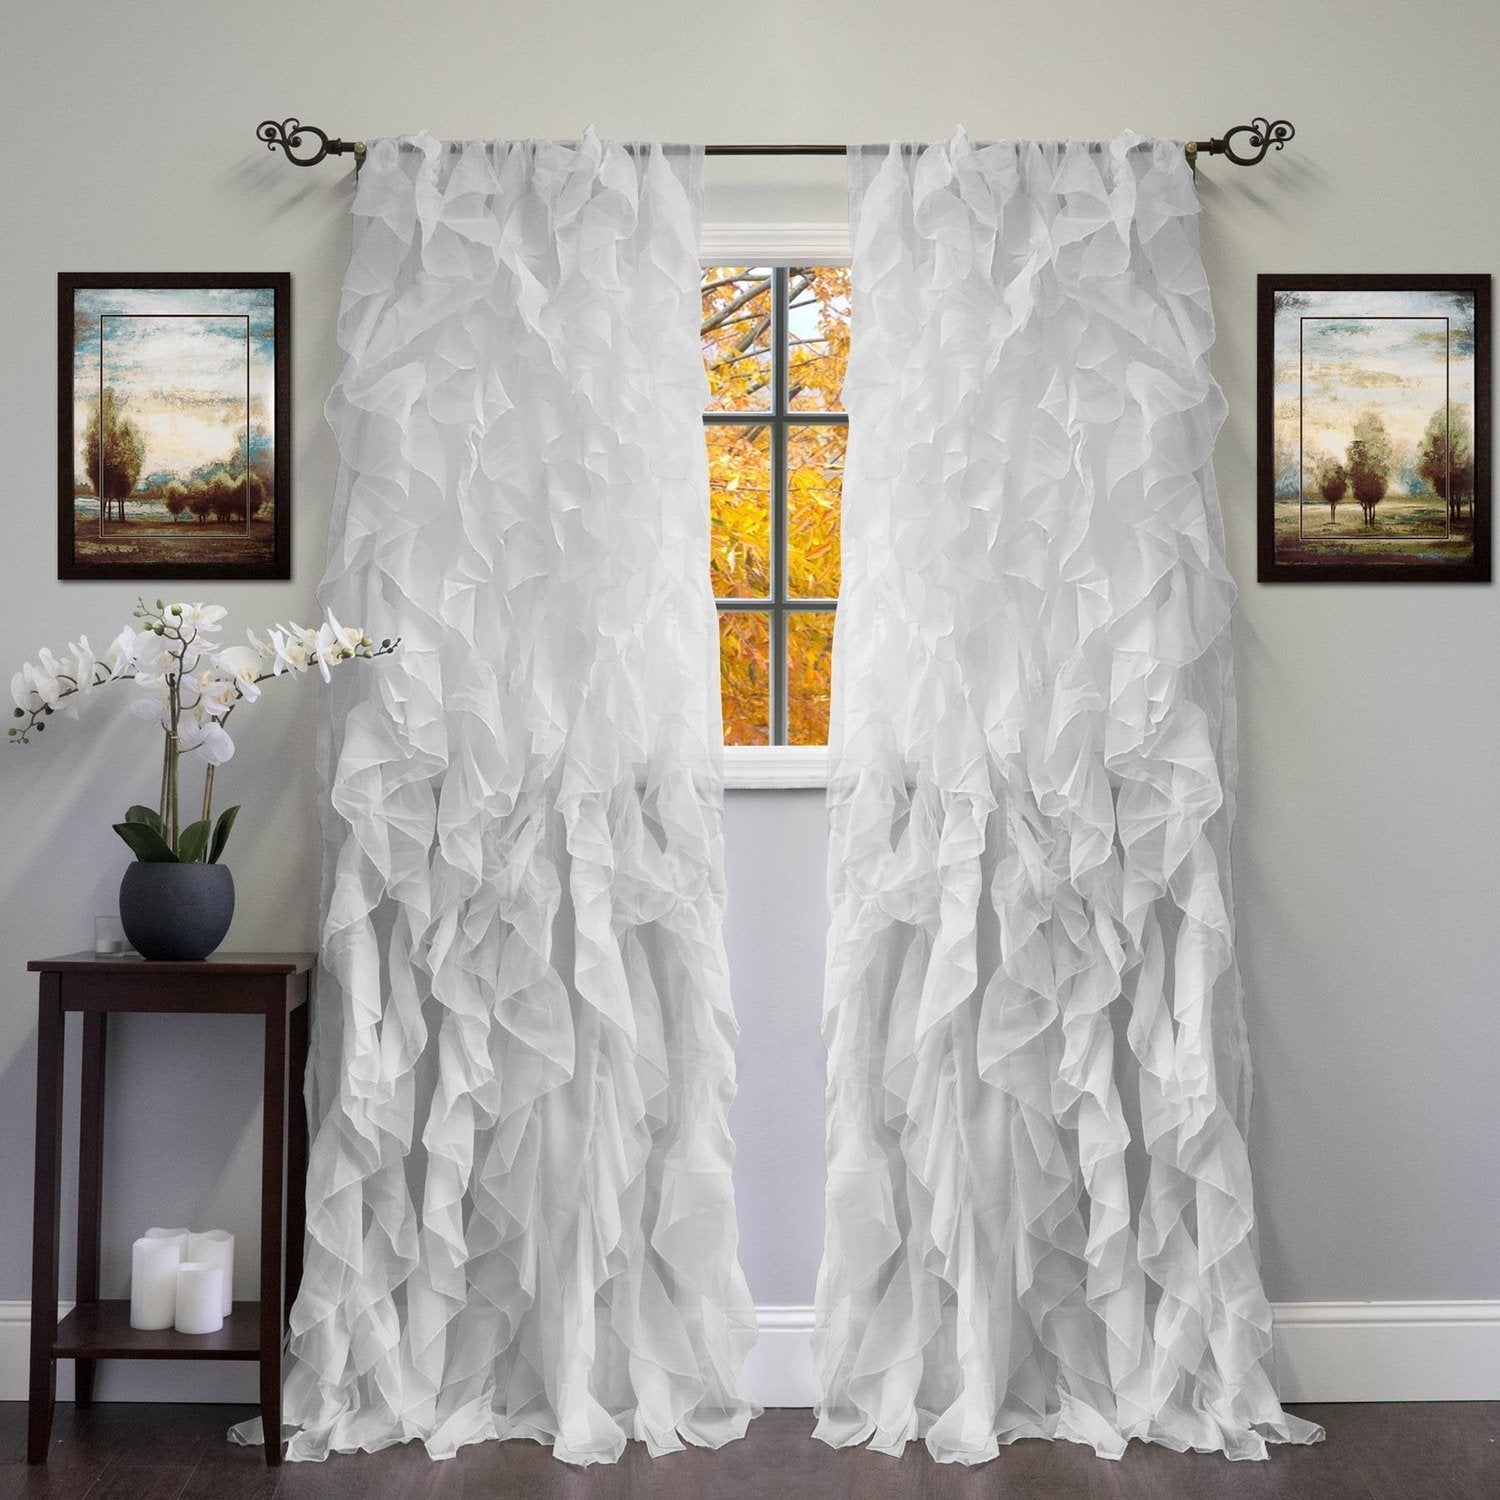 Chic Sheer Voile Ruffled Window Curtain 2-Pack Silver 84X100